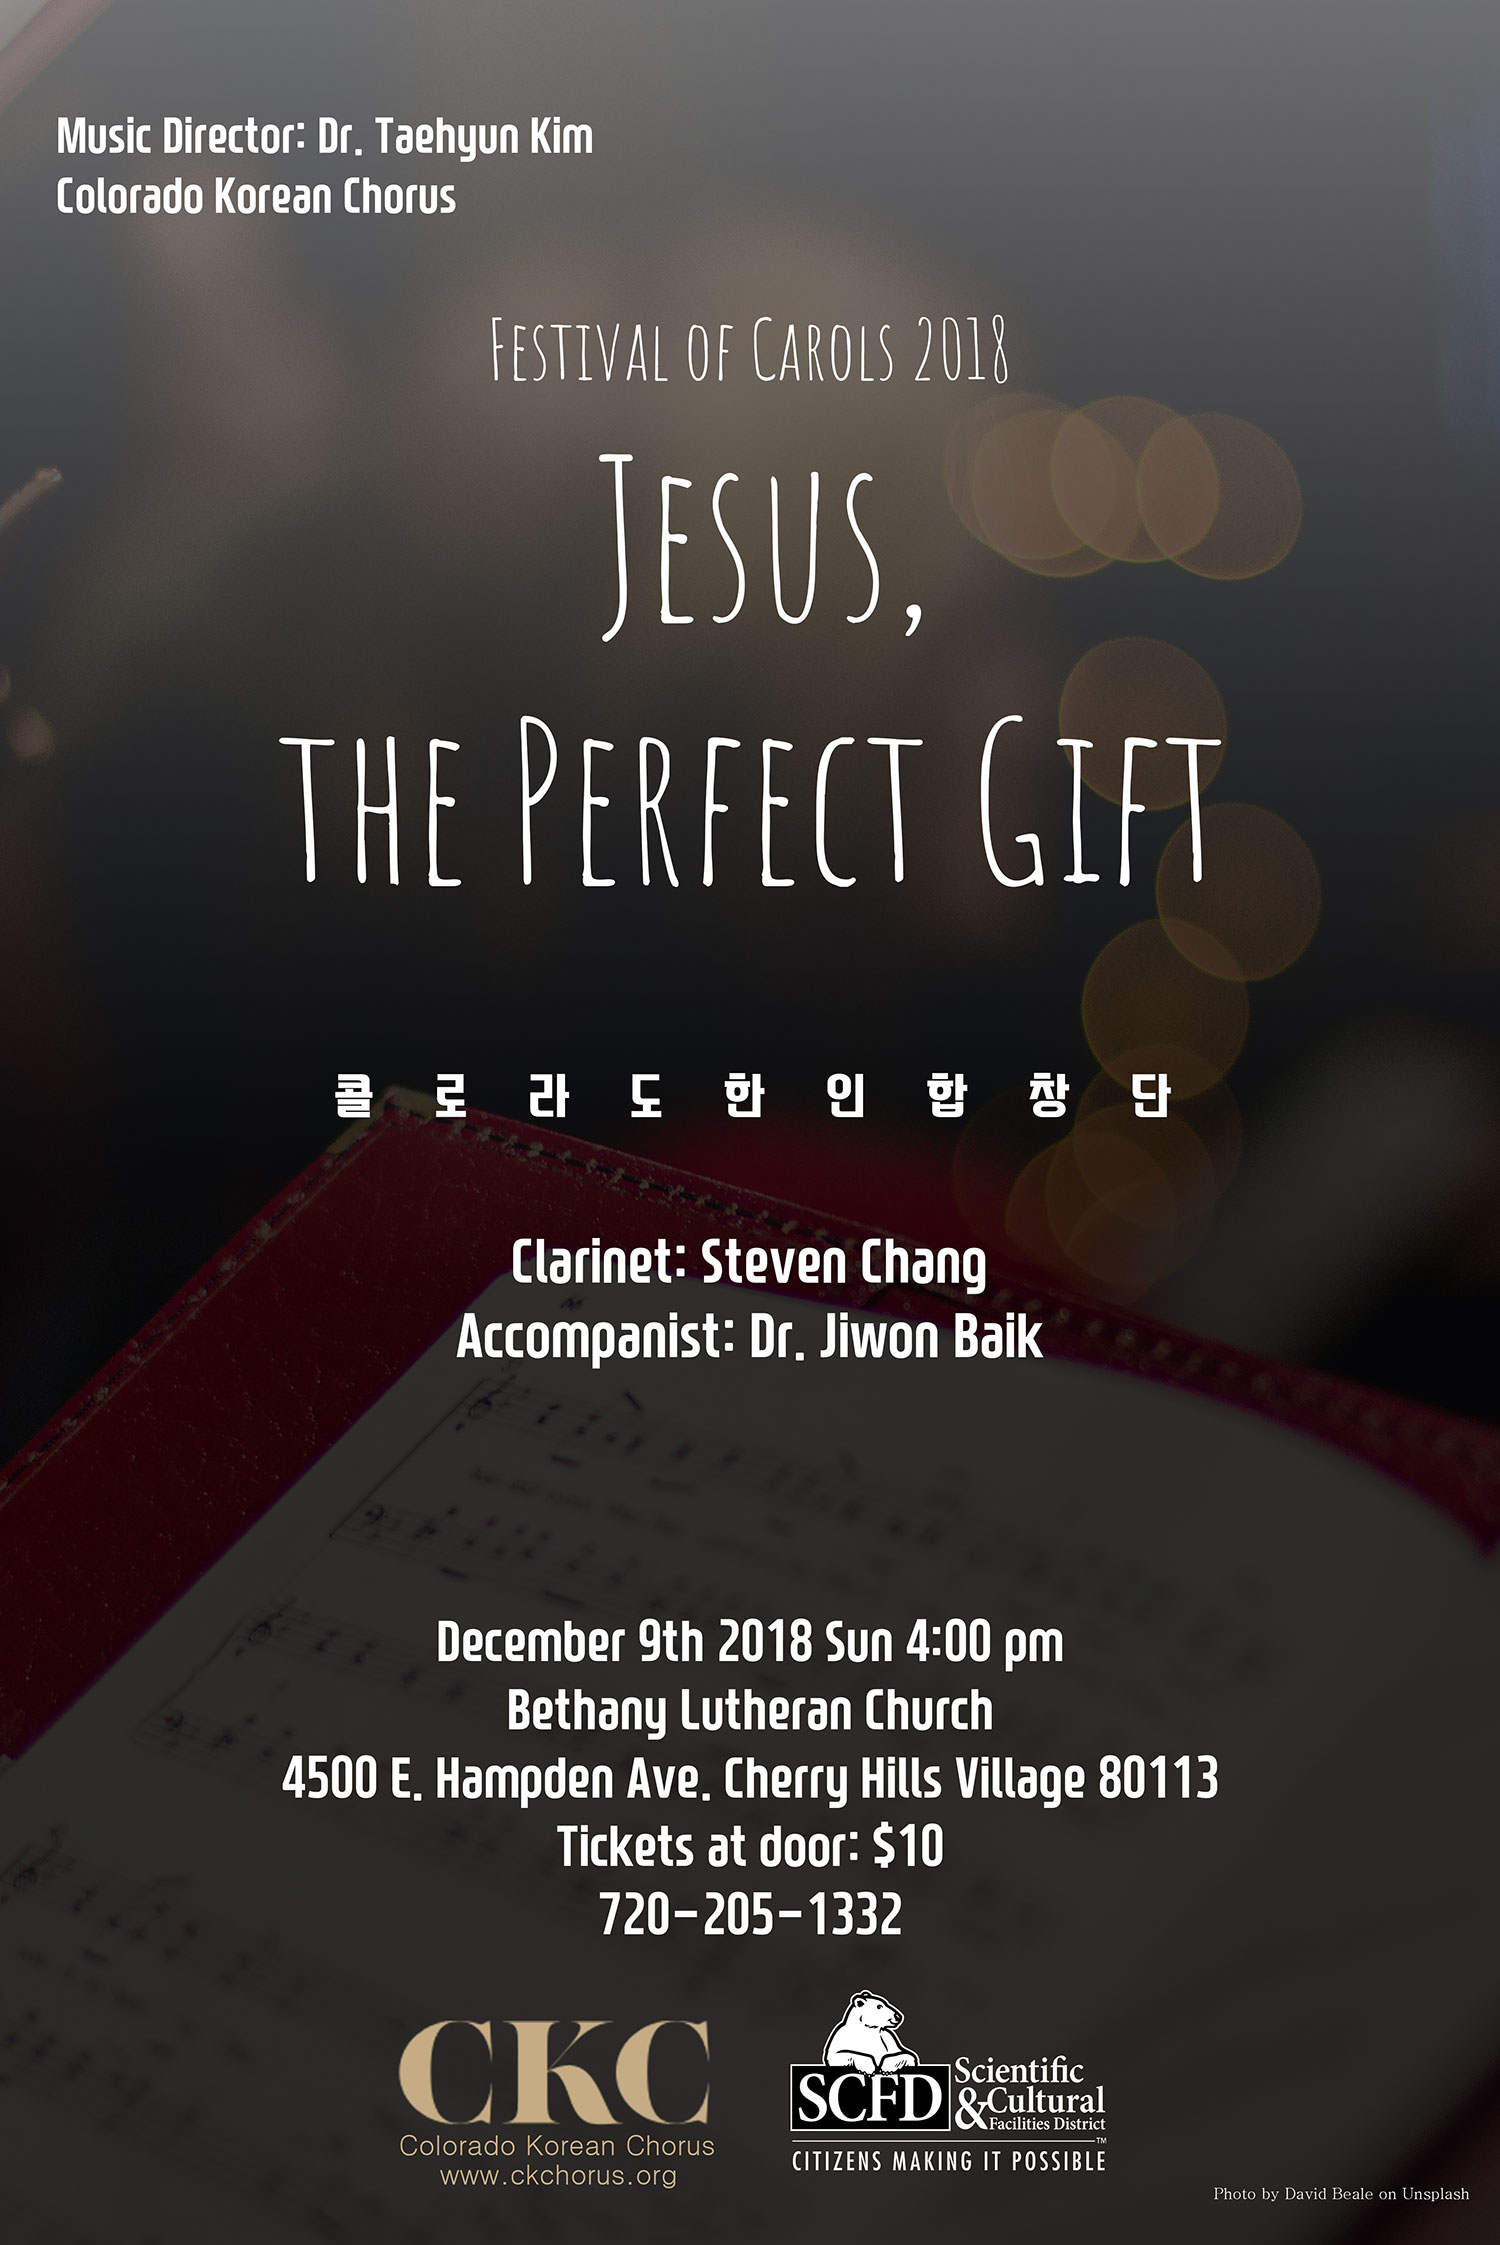 The Festival of Carols 2018 “Jesus, the Perfect Gift”